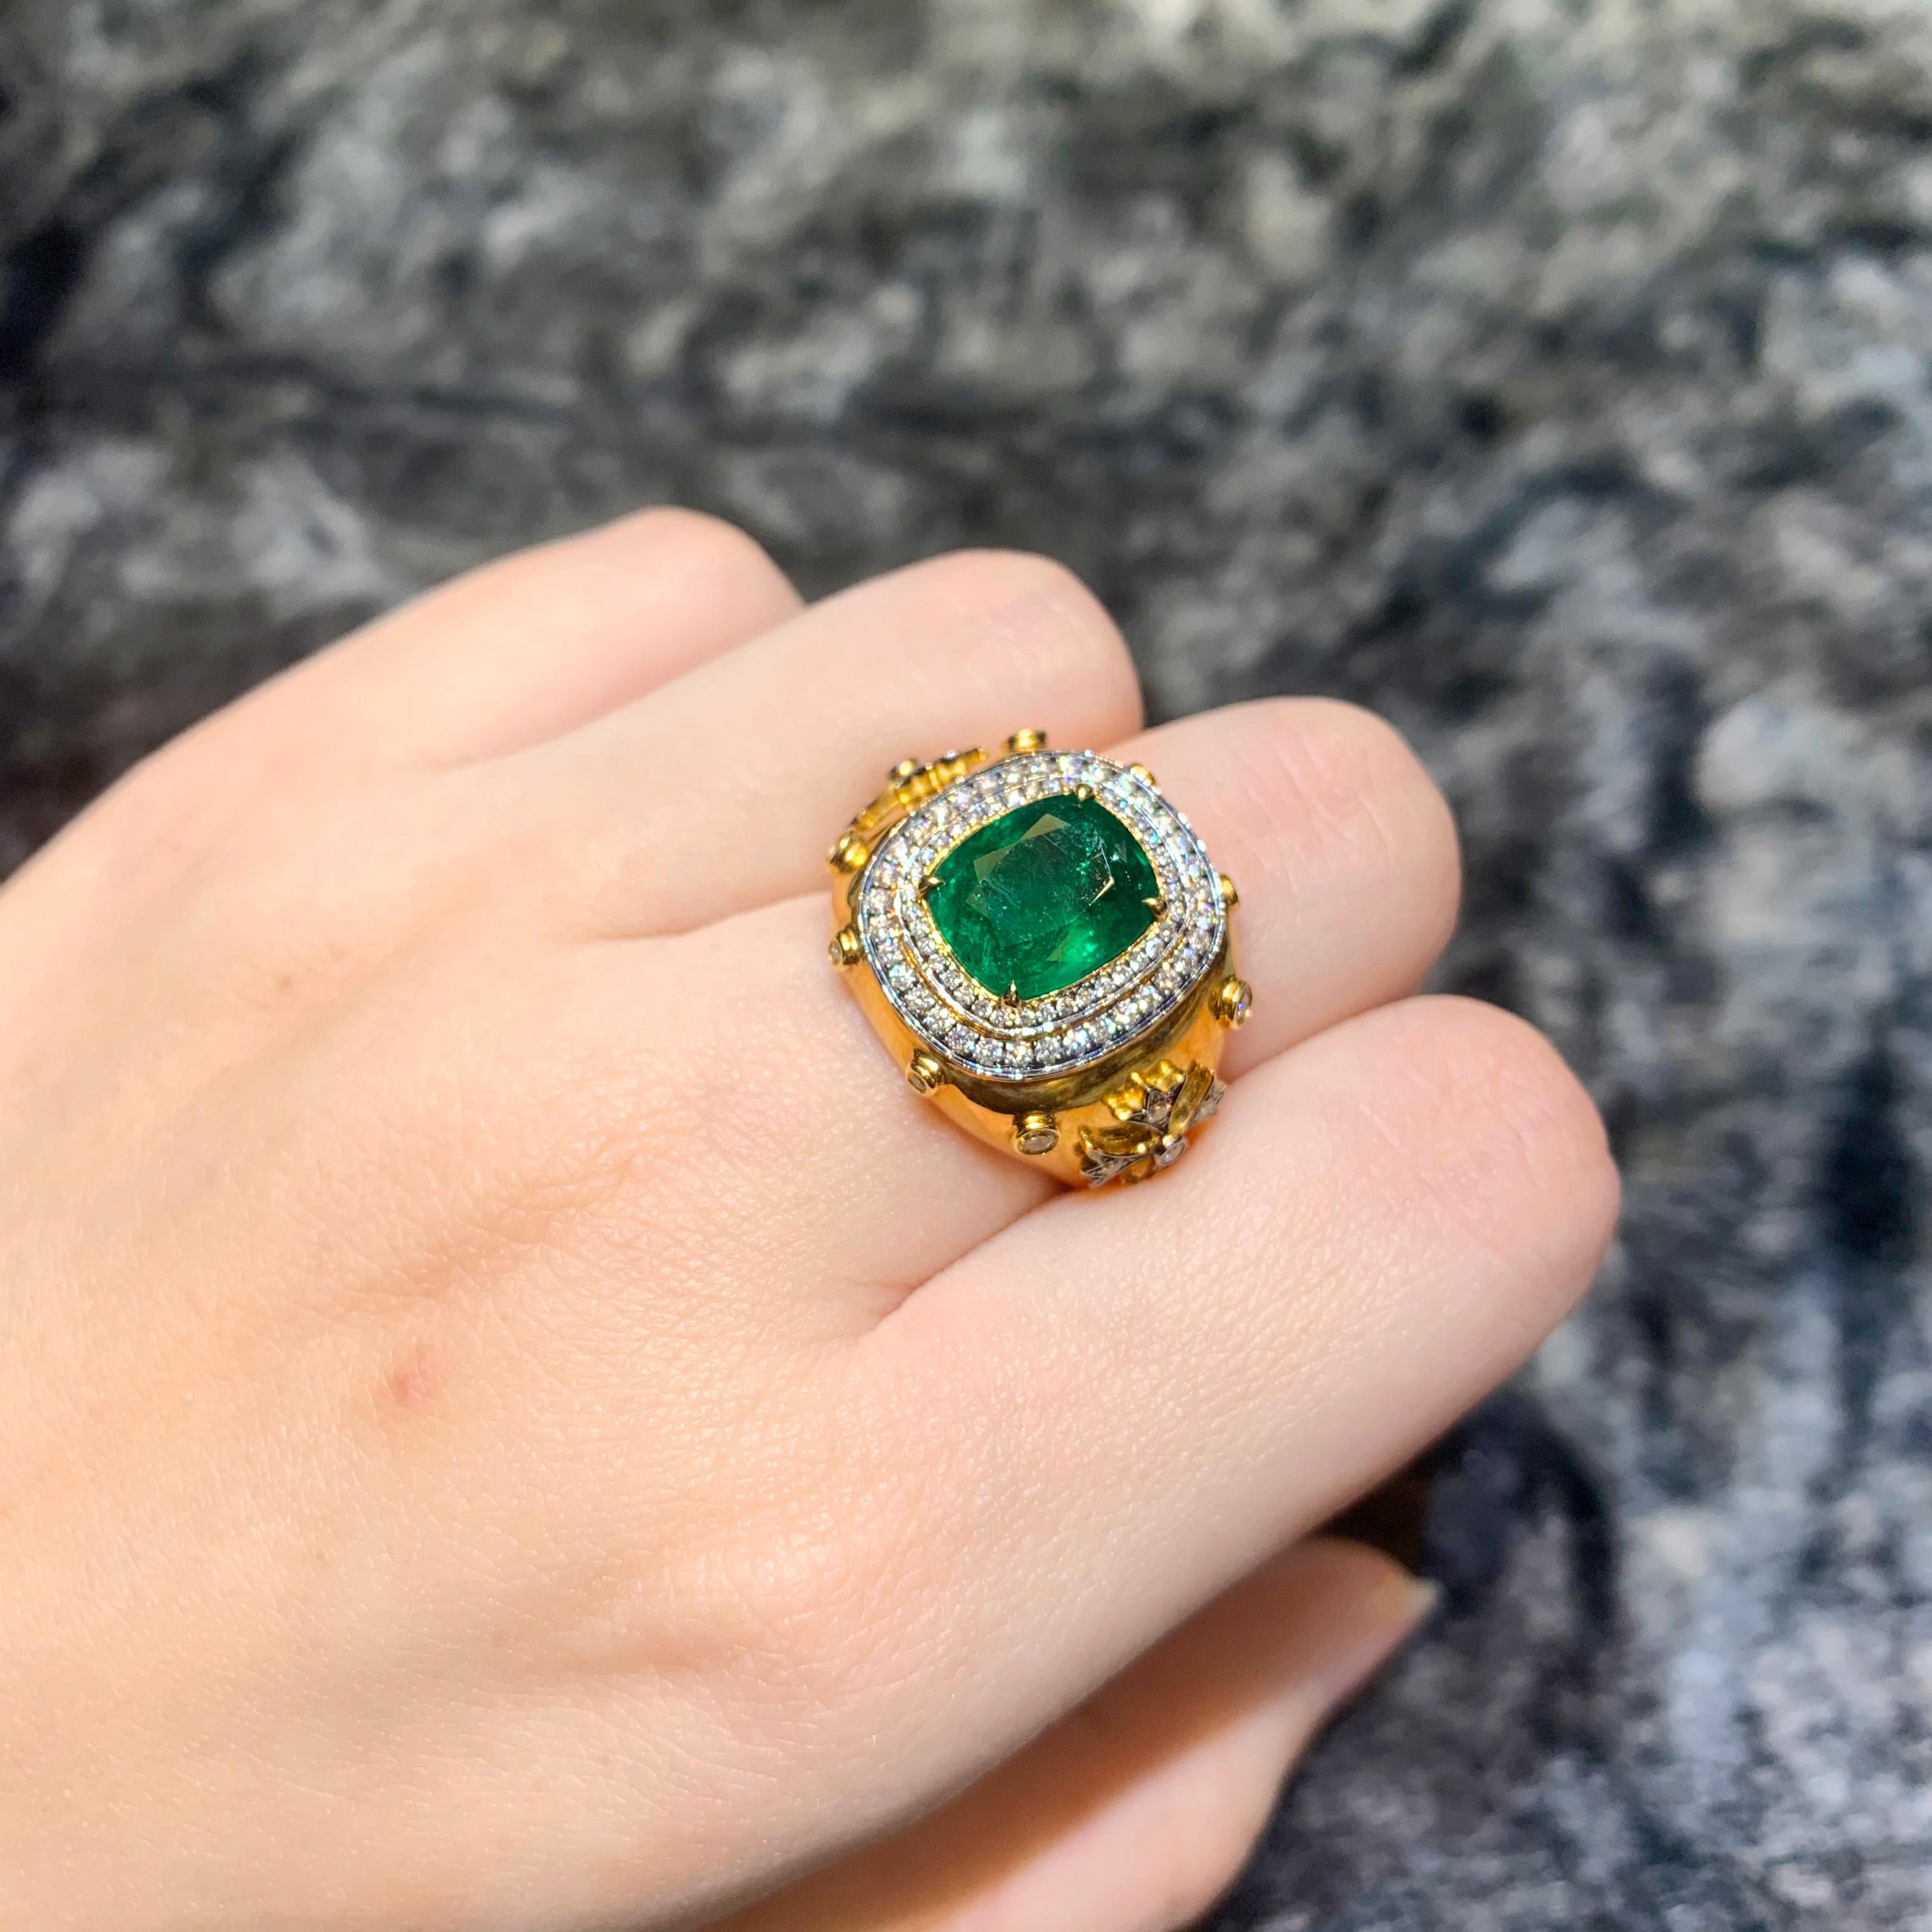 The ring has 3.19 carat of Vivid Green Zambian Emerald in an antique setting accompanied with 0.53 carat of white round brilliant diamond.